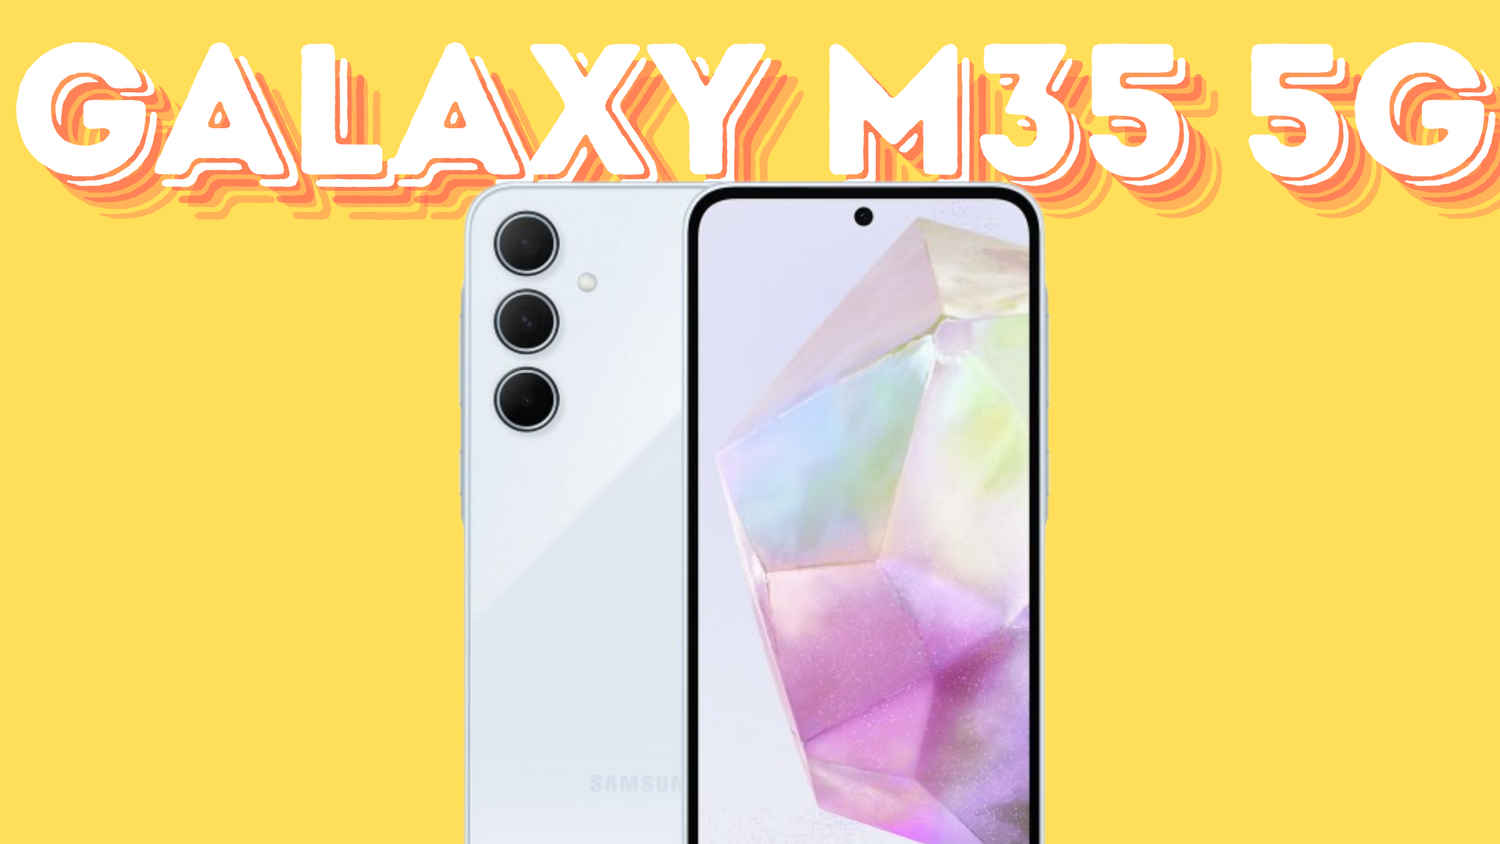 Samsung Galaxy M35 5G India launch teased: Expected specs, features & more